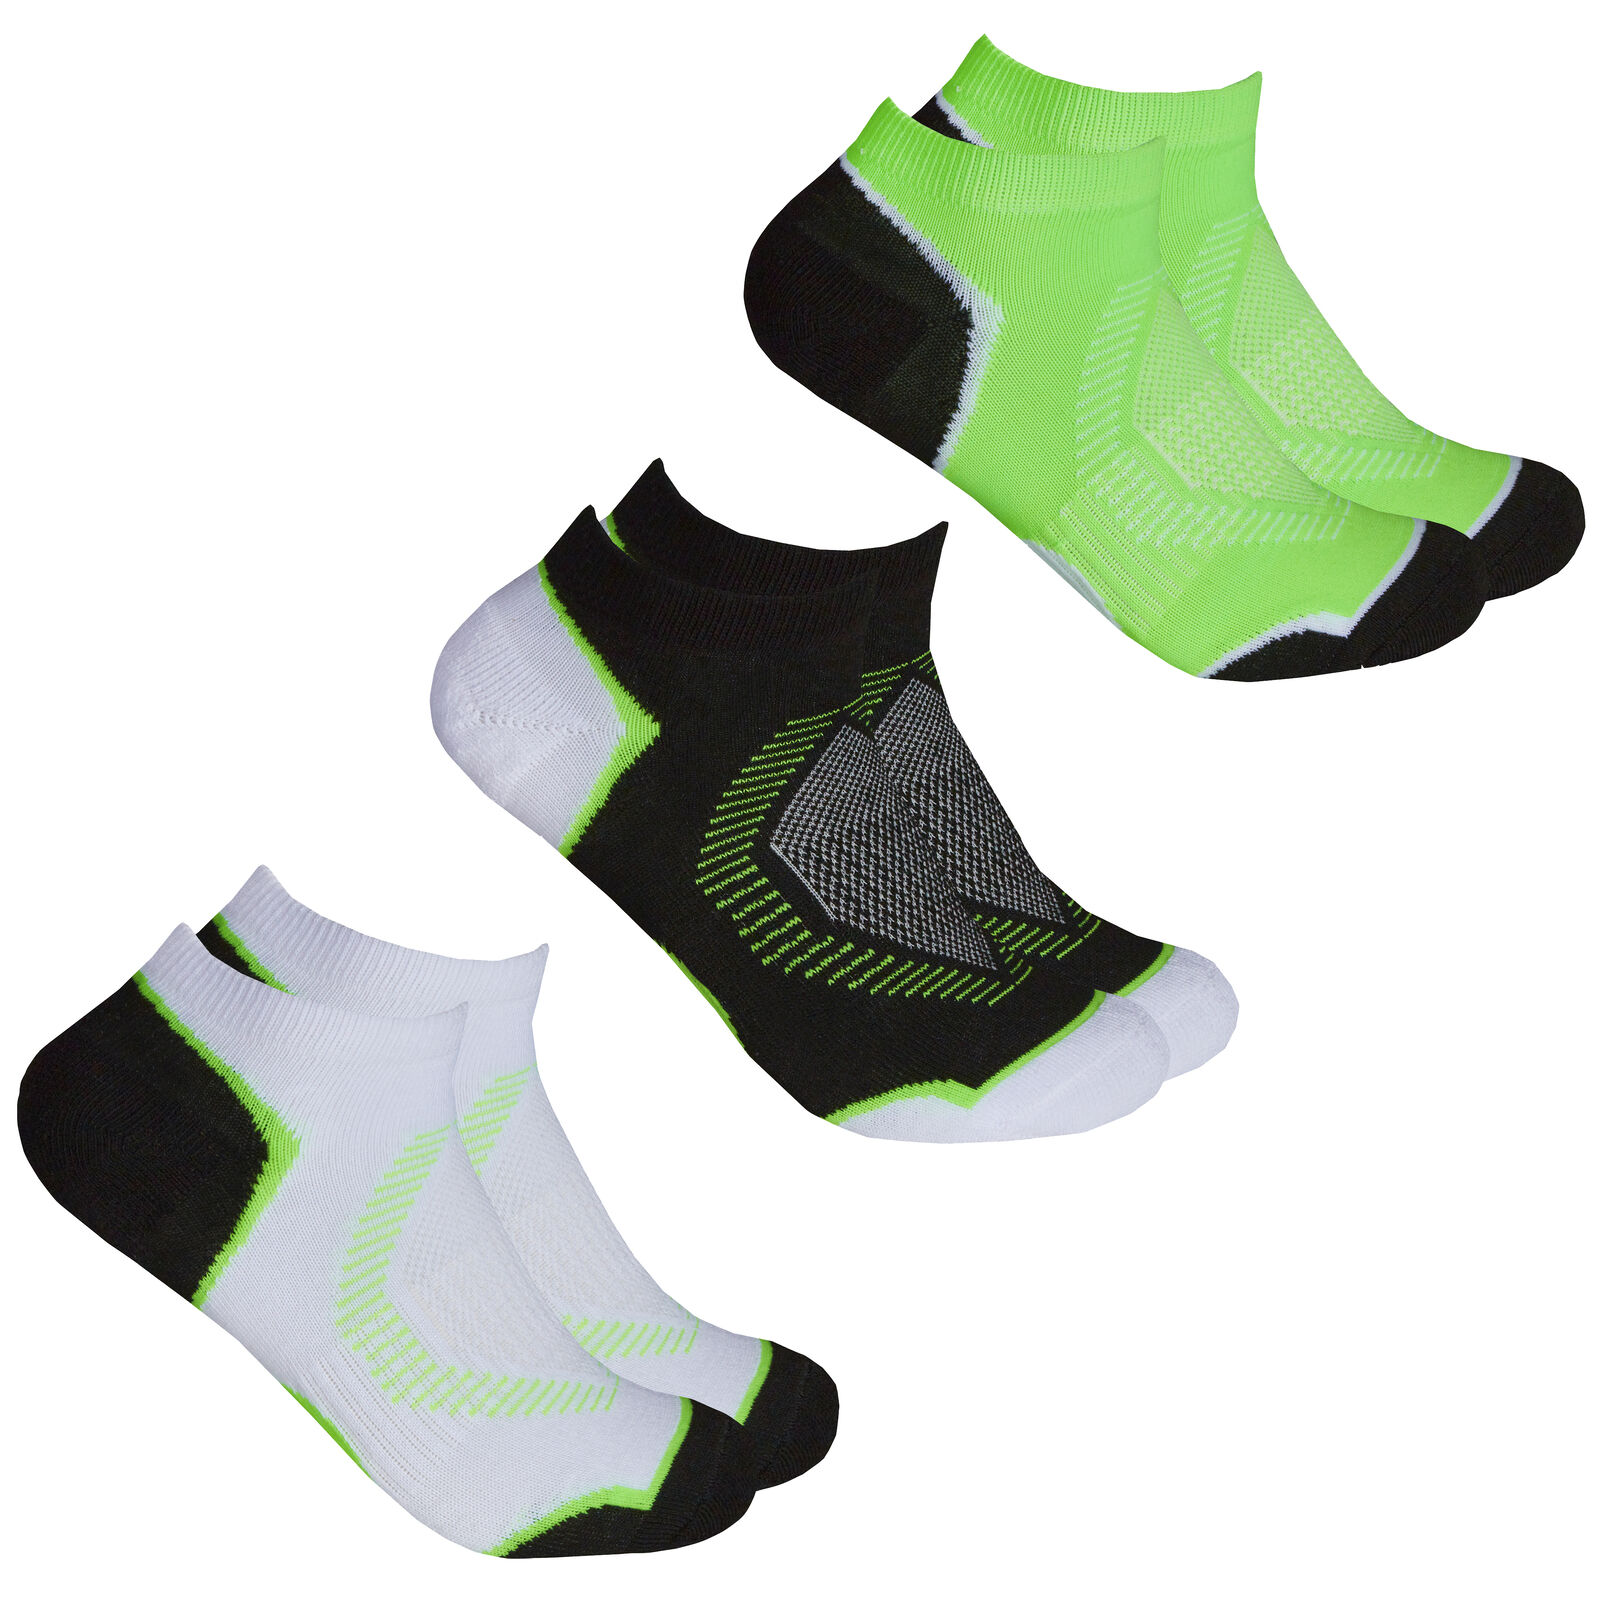 Details about   Women's Ladies Ankle Low Cut Socks Running Trainer Liners Sports Gym 3 Pairs 